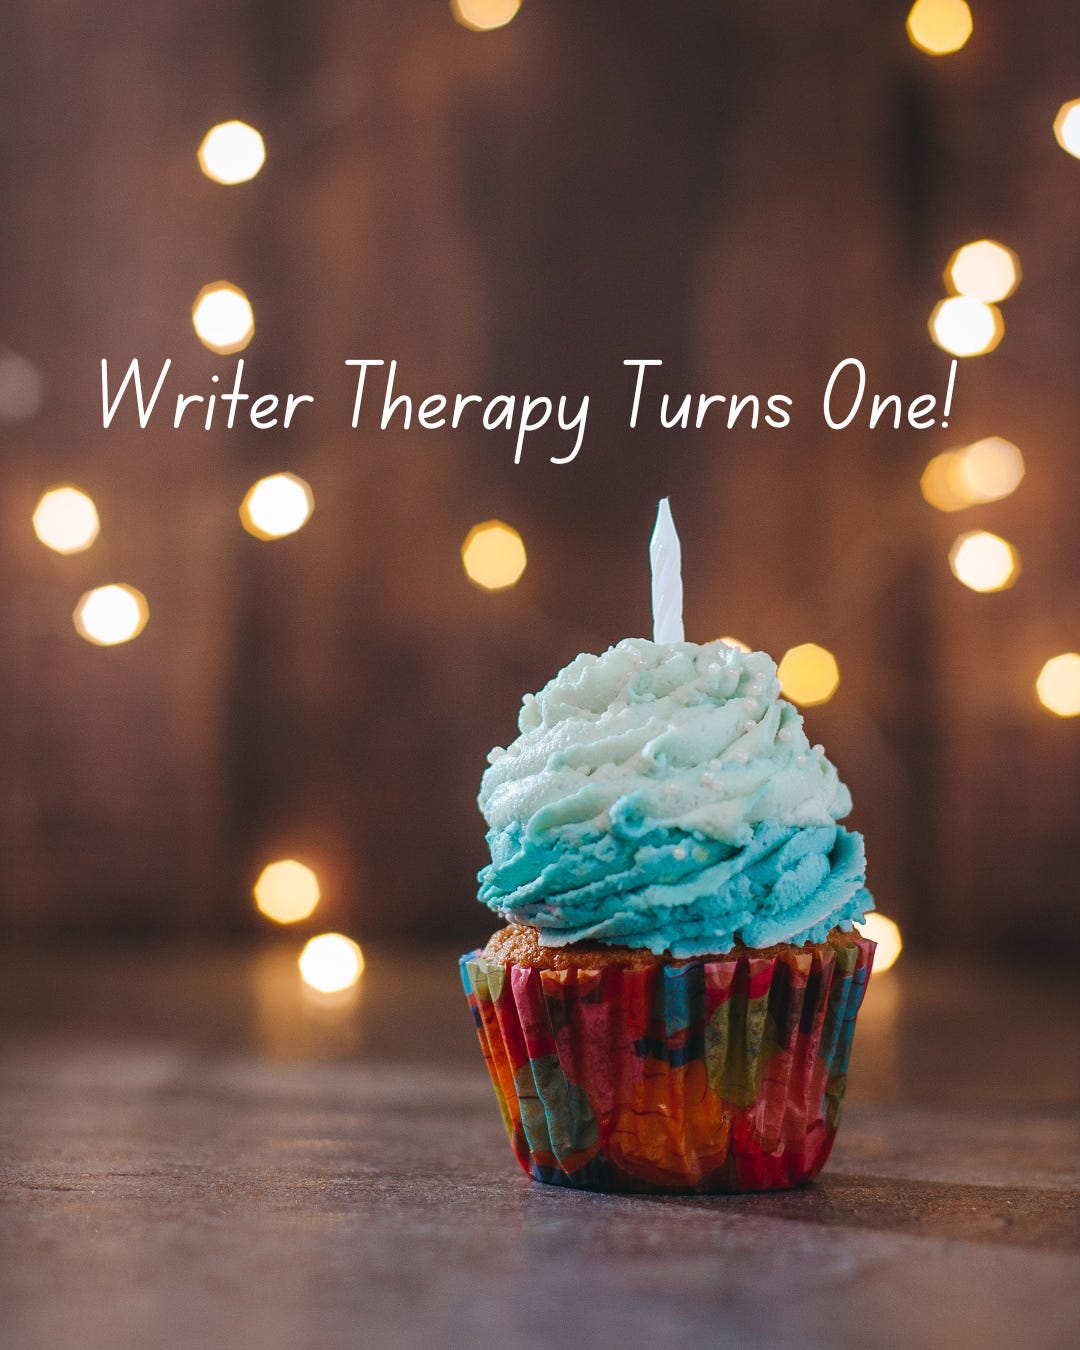 Stock image of a rainbow cupcake with a pile of icing in a gradient blue, and one candle. Twinkly lights in the background. Text reads, Writer Therapy Turns One!